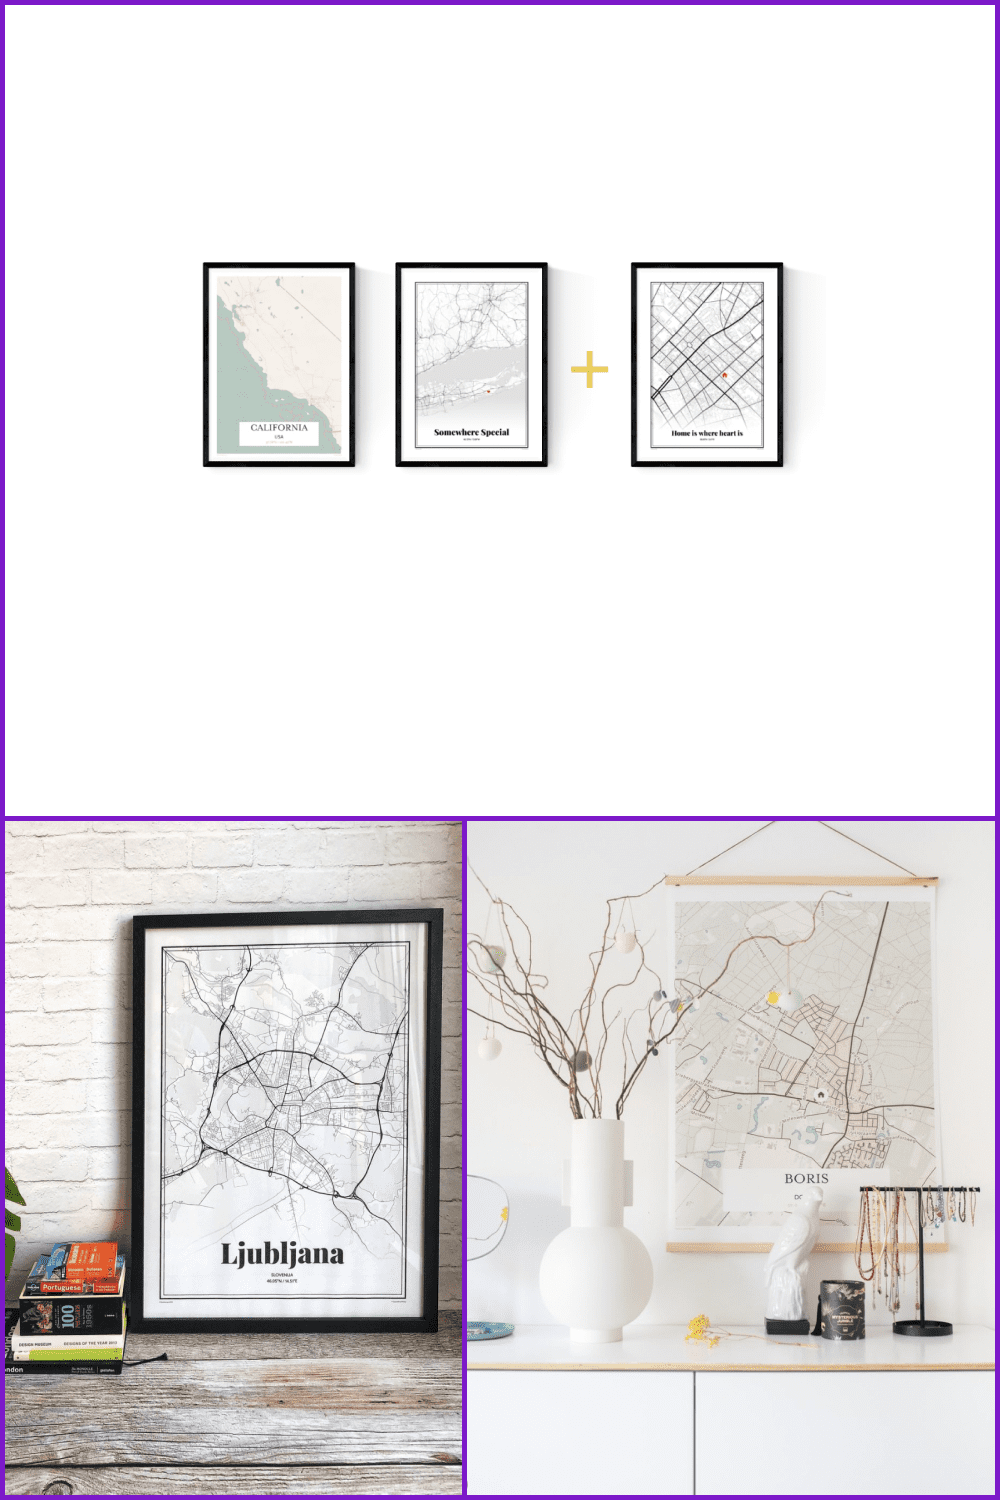 Maps in the frames on the wall.